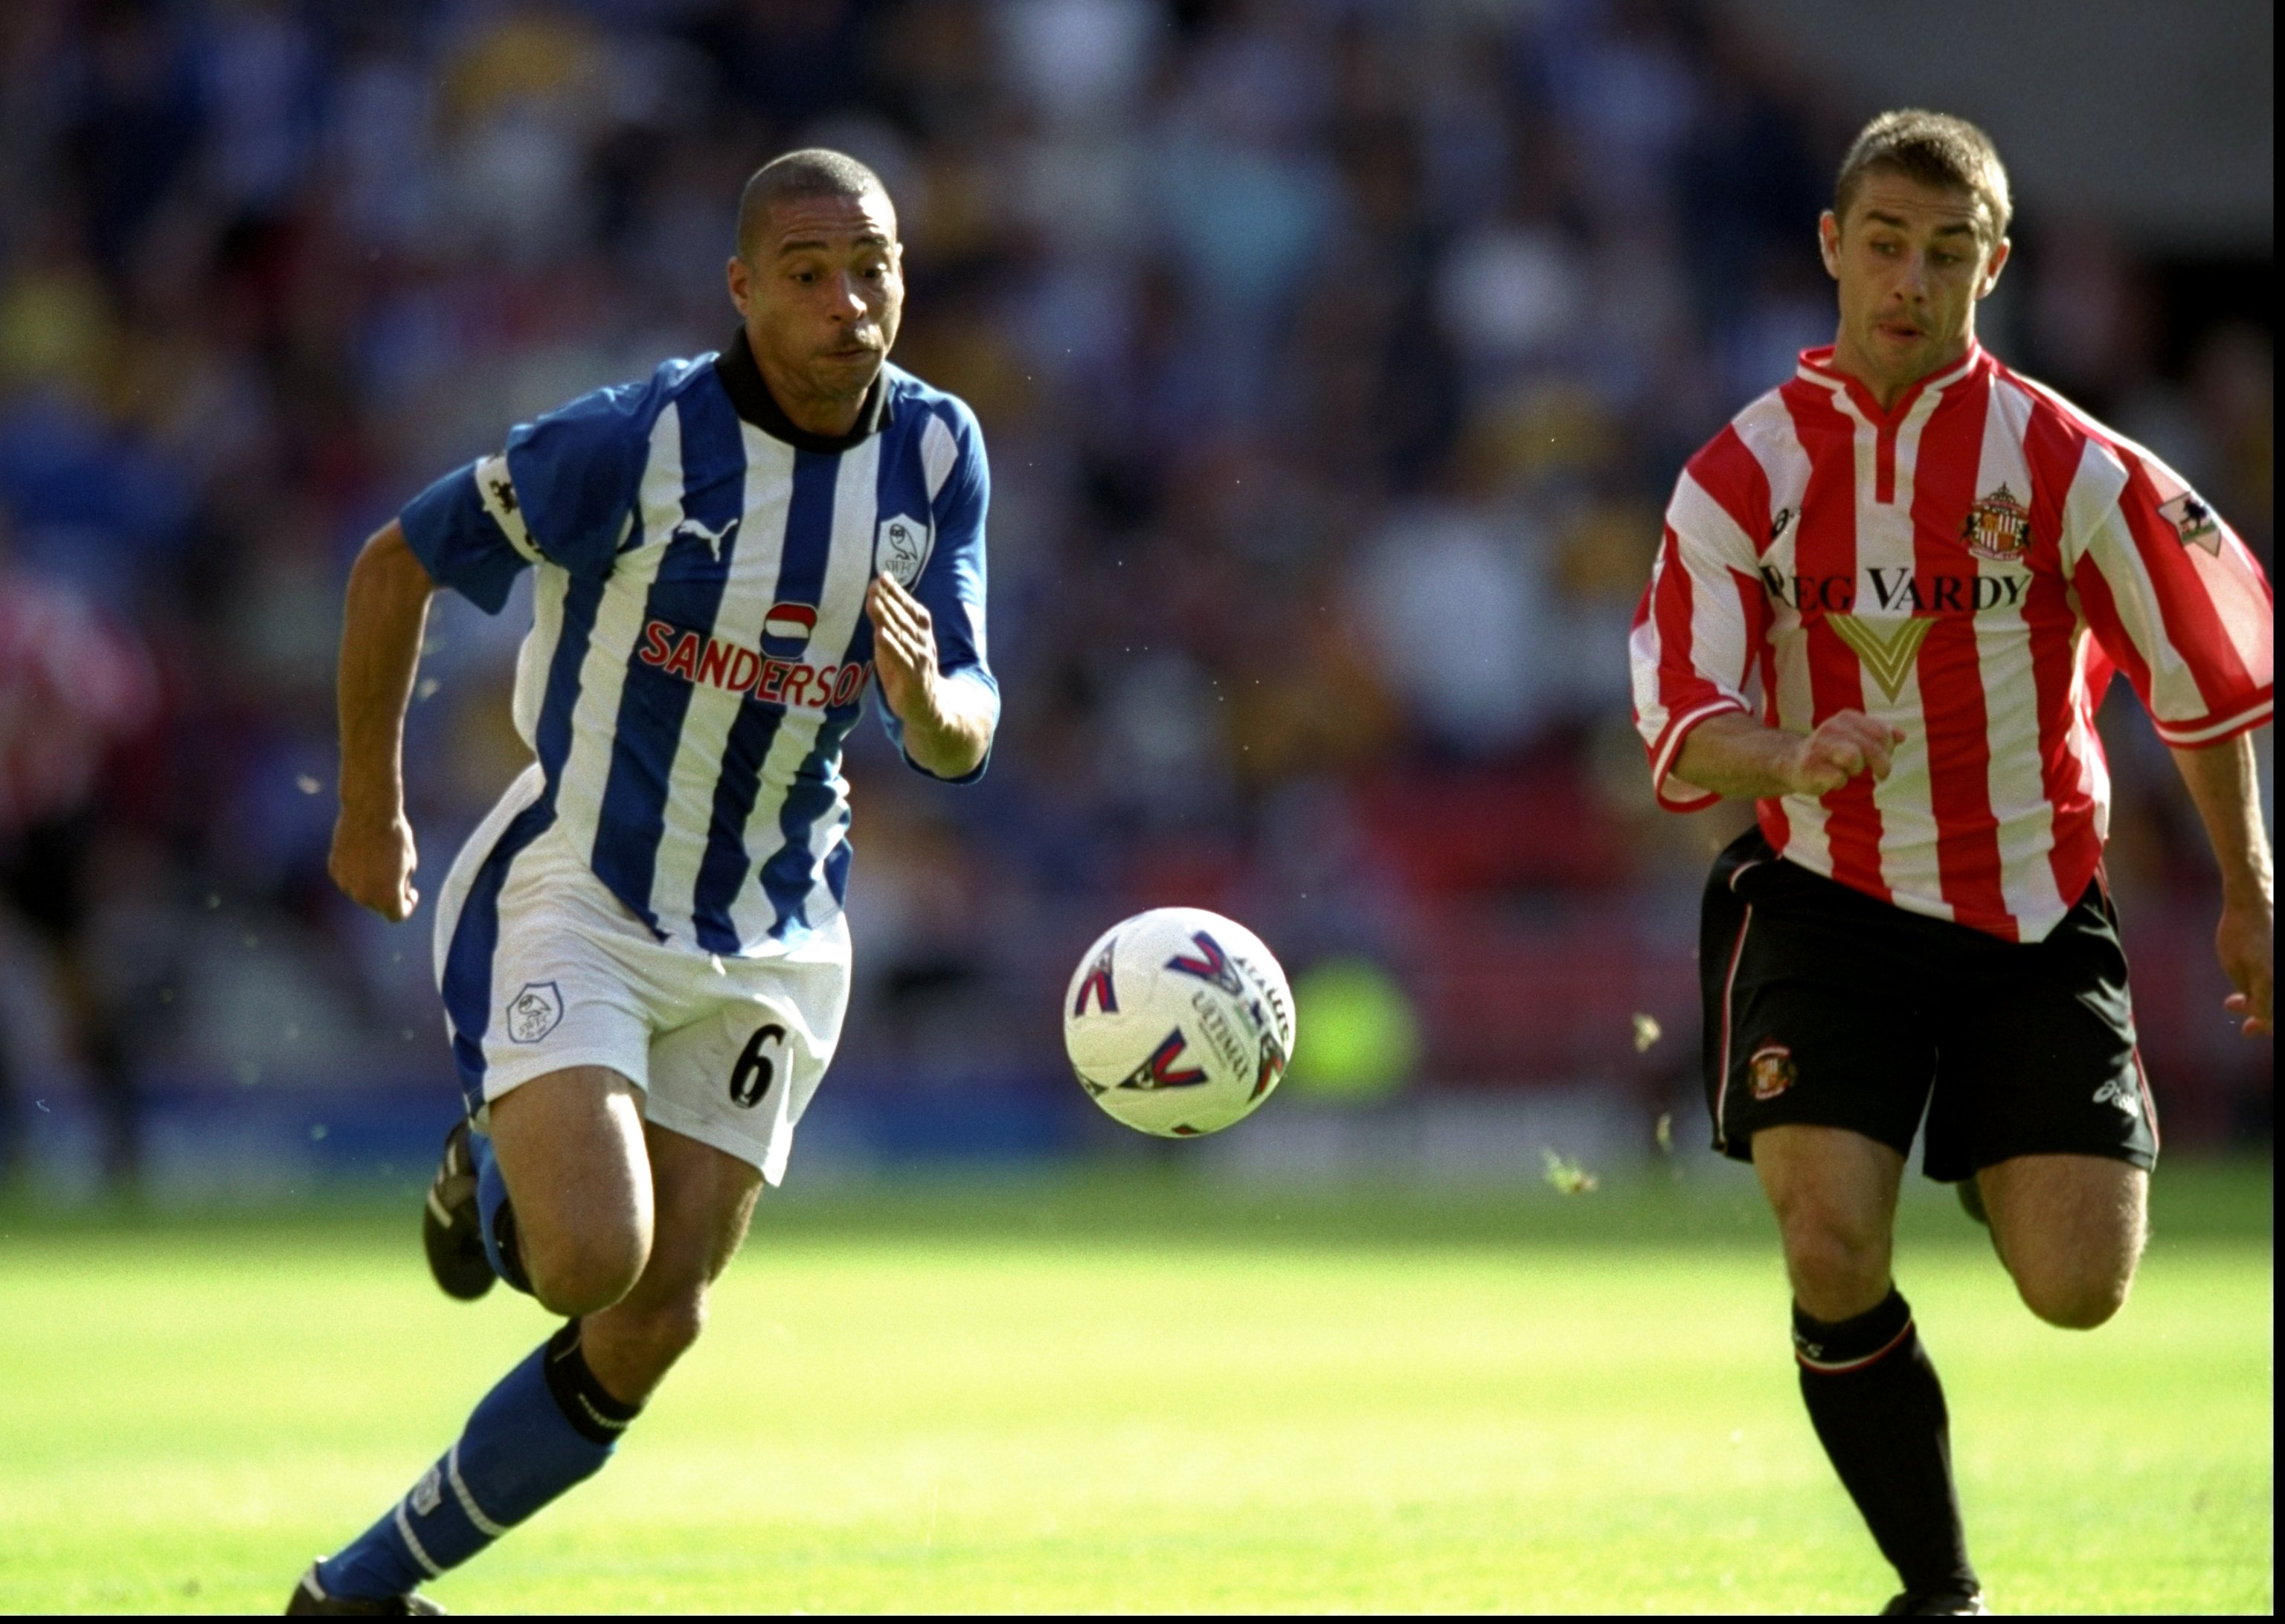 Sheffield Wednesday's Des Walker competes for the ball with Sunderland's Kevin Phillips in a Premier League match in September 1999.